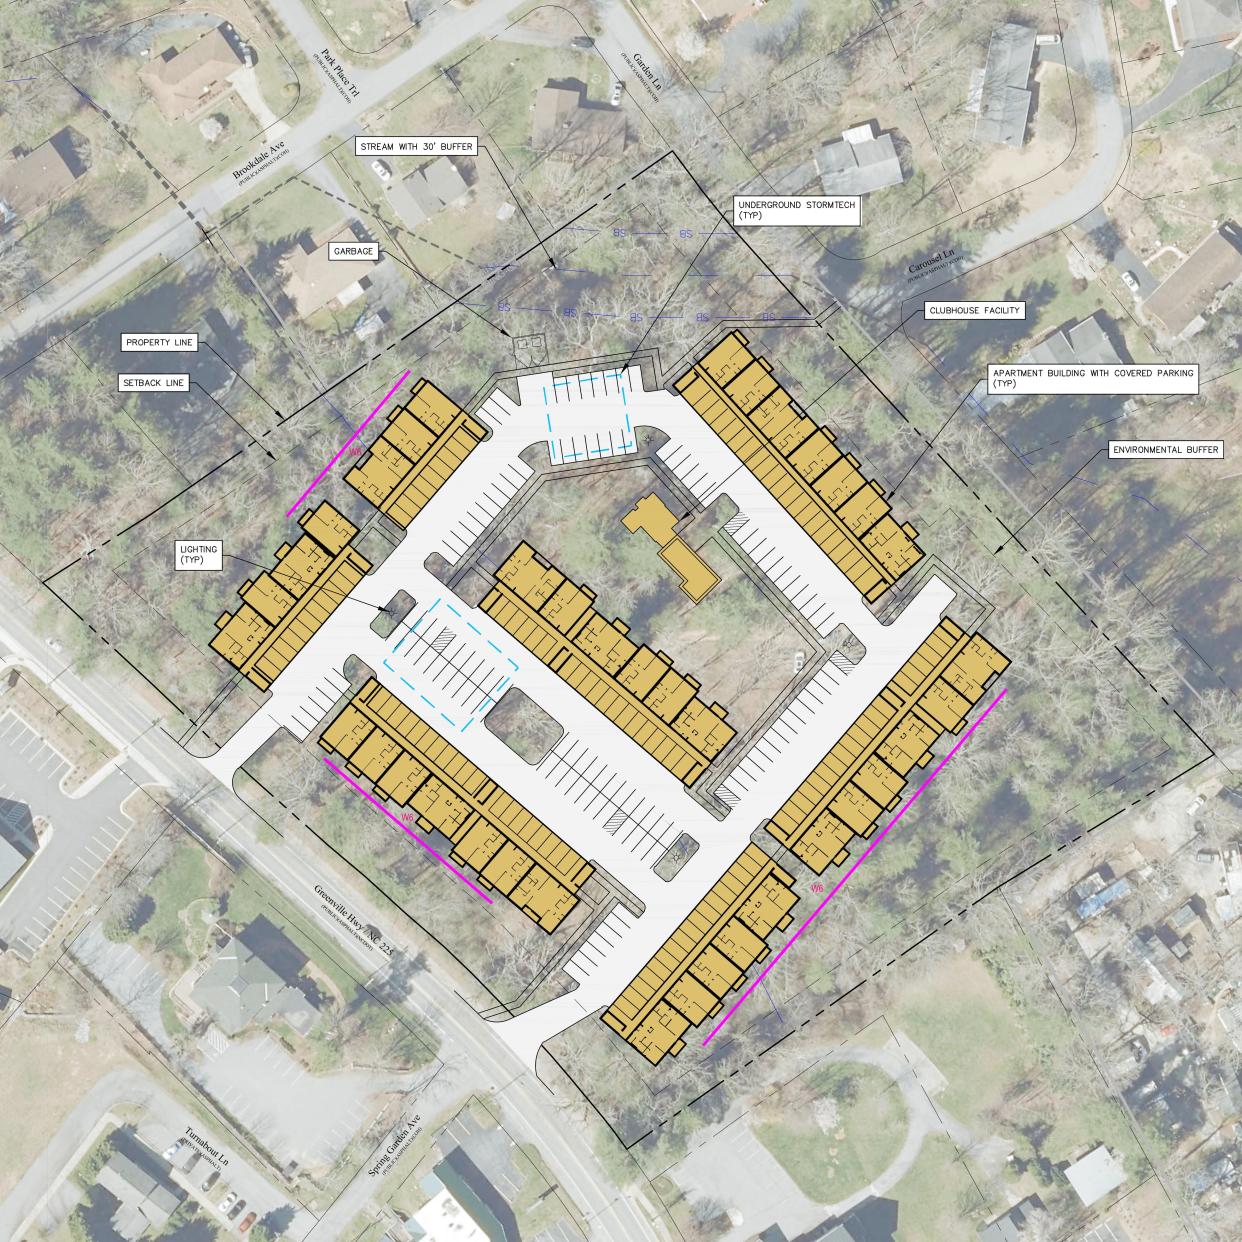 Conceptual site plans for an 185-unit apartment complex at 1202 Greenville Highway, Hendersonville, designed by Asheville-based Civil Design Concepts.